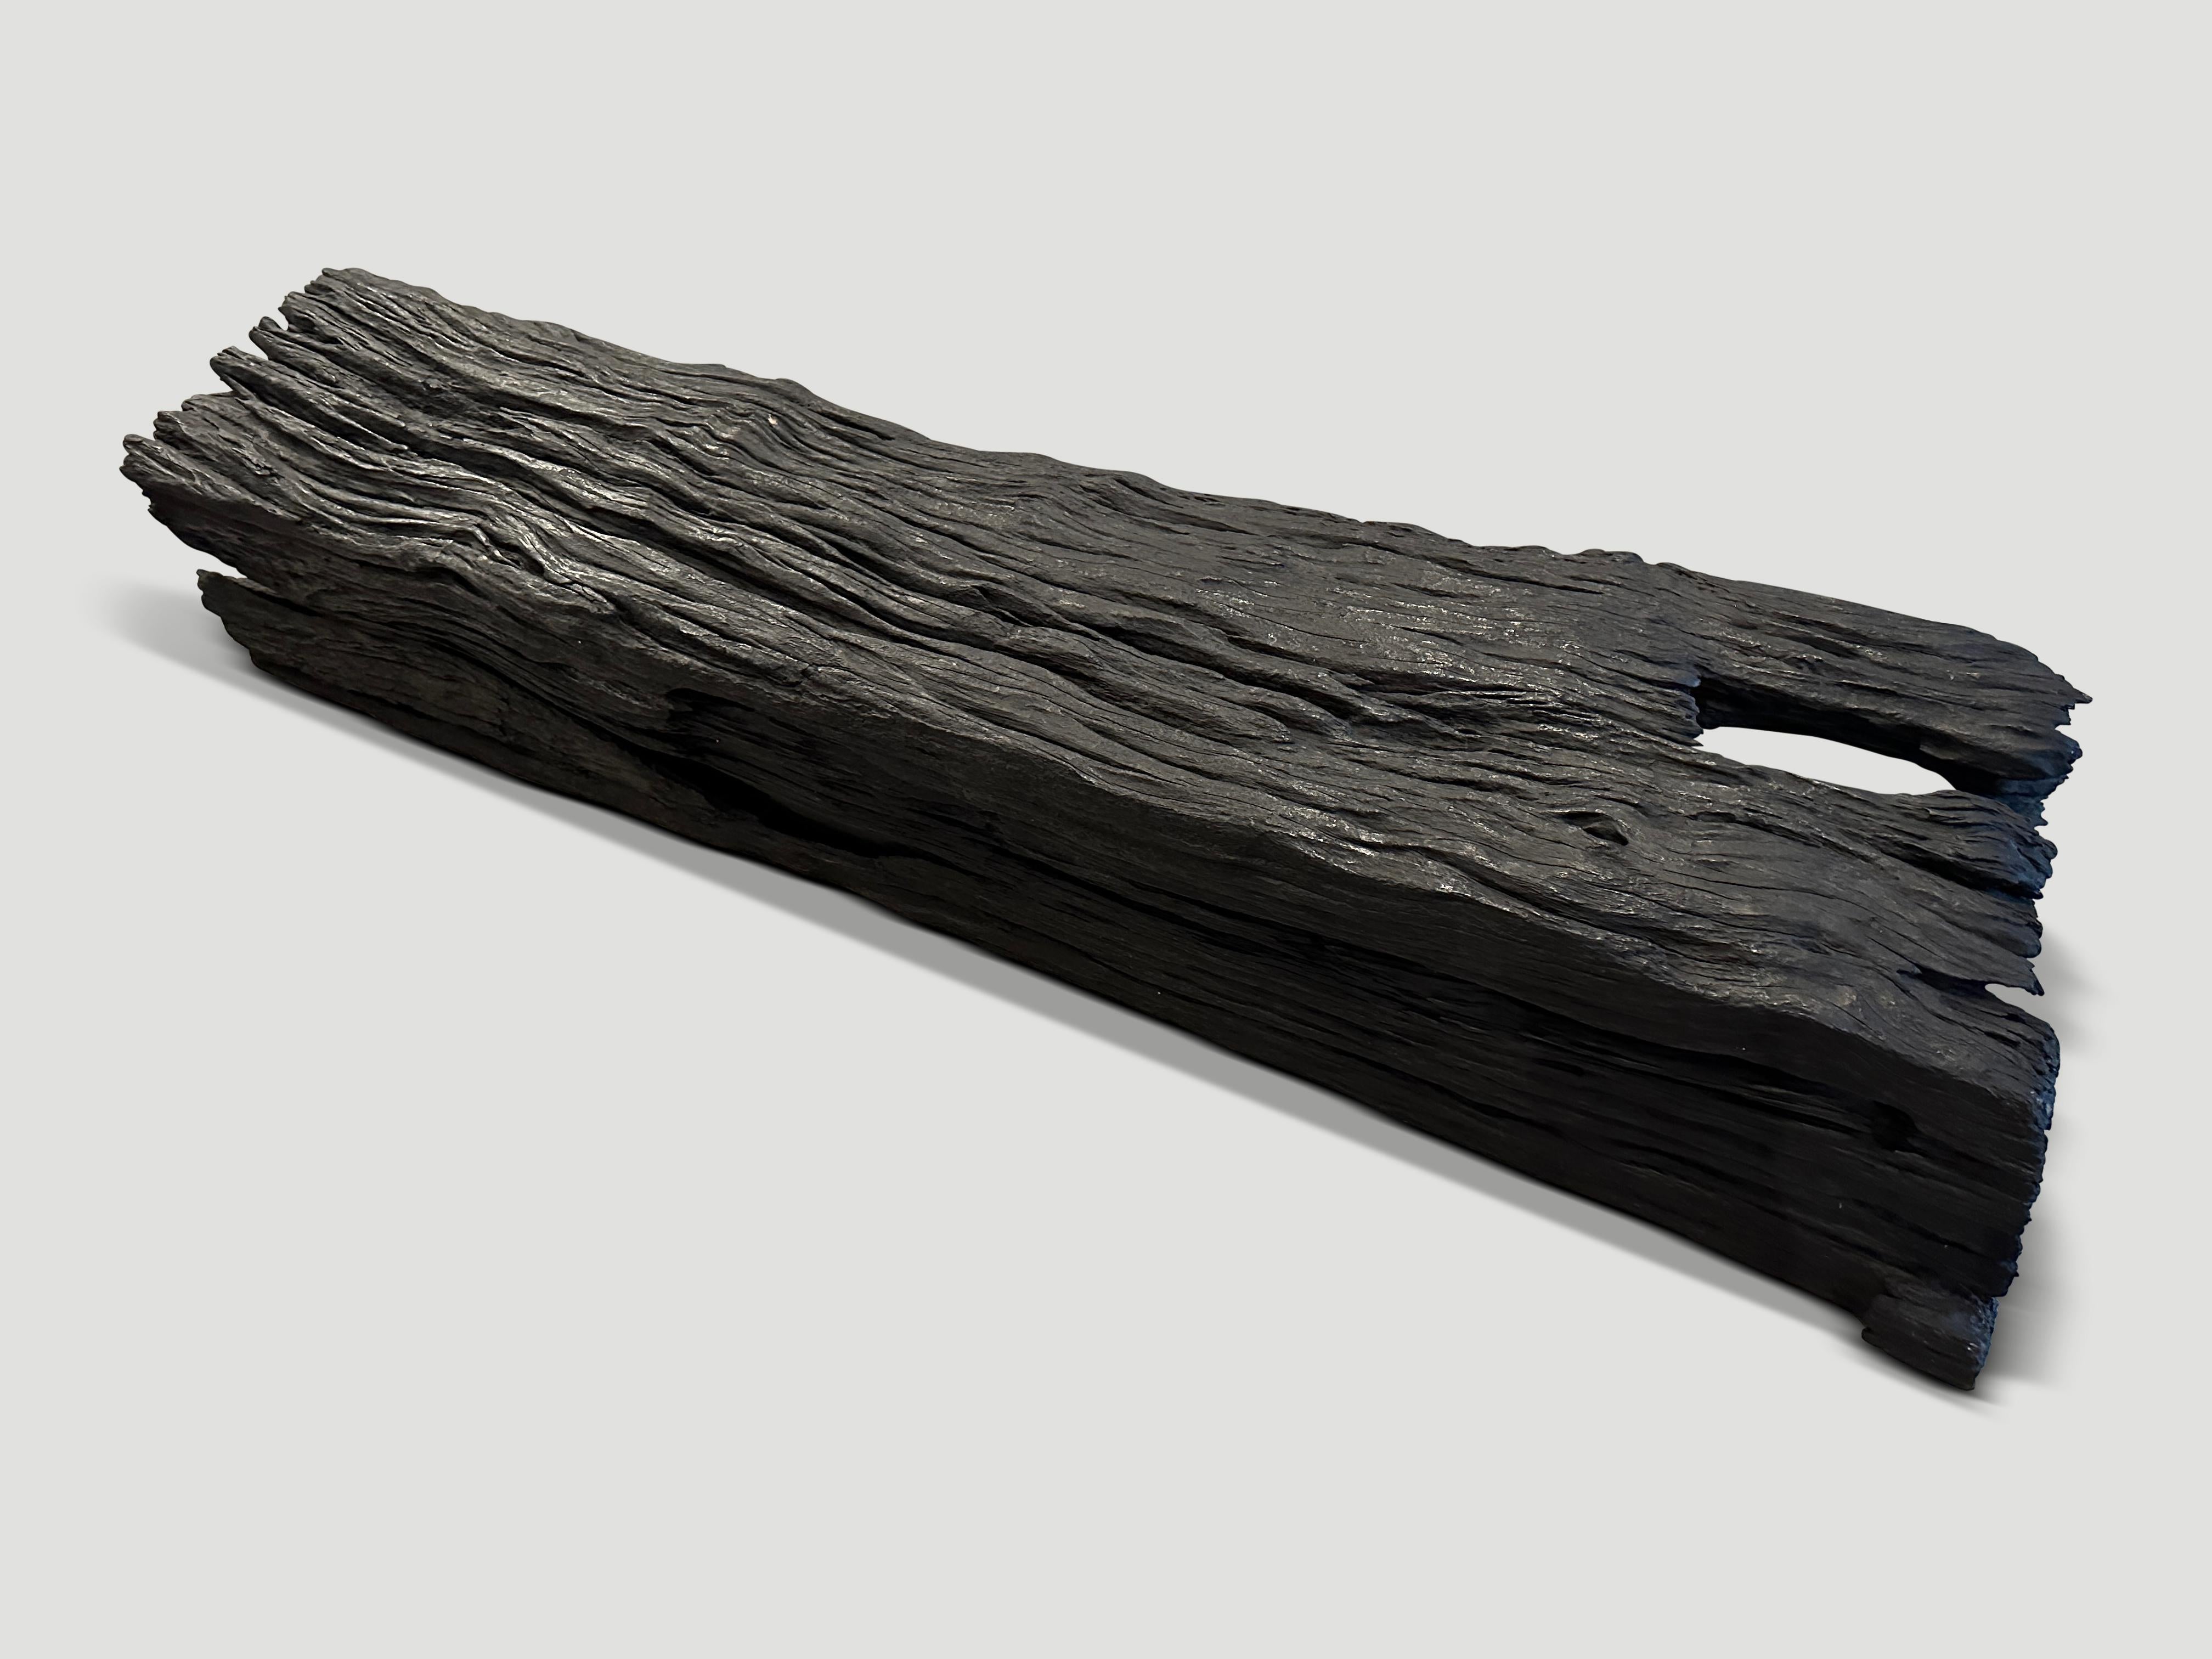 Organic Modern Andrianna Shamaris Sculptural Century Old Charred Bench For Sale